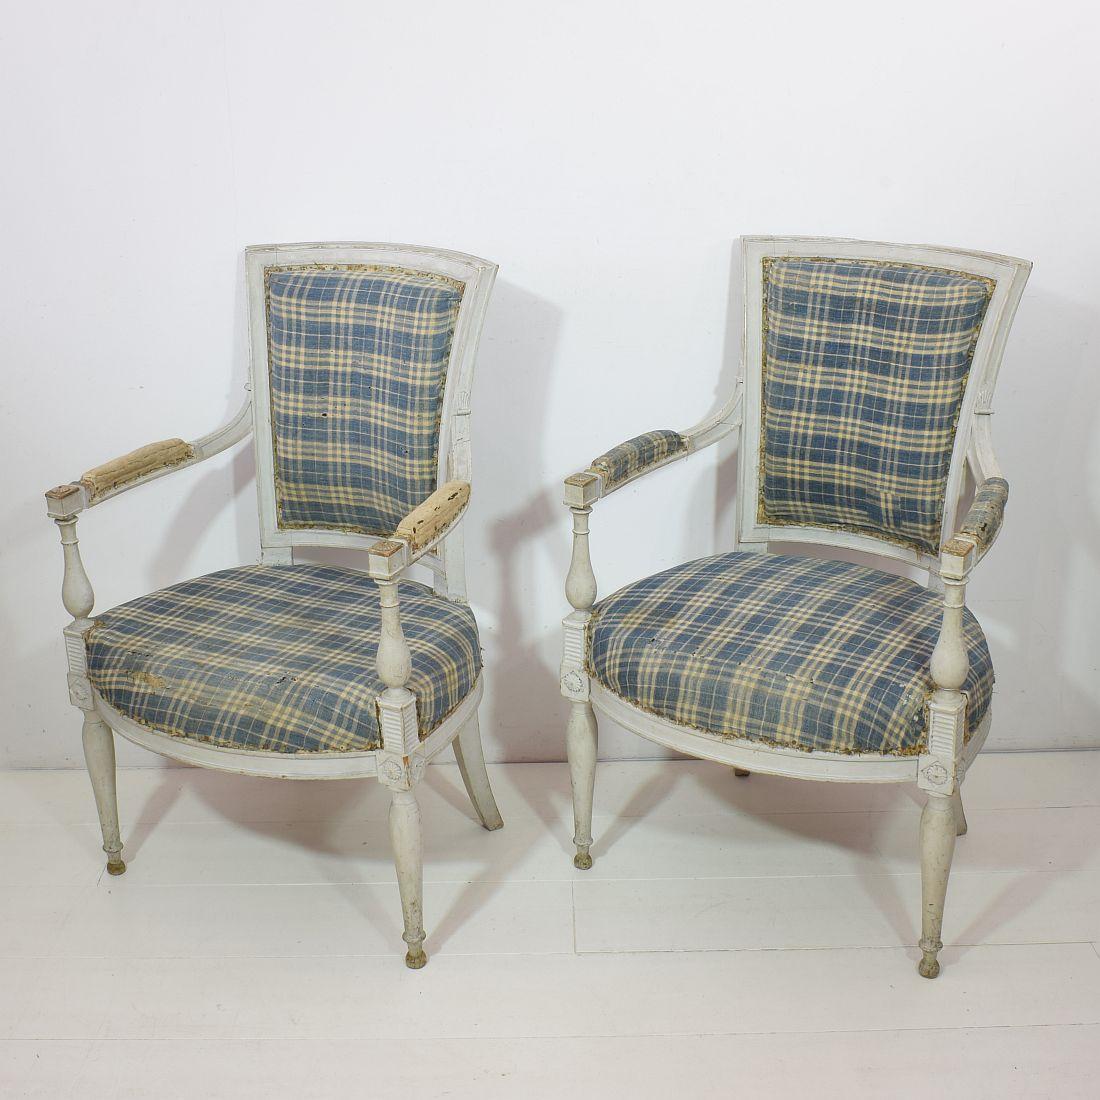 Beautiful pair of French original Directoire chairs, France, 18th century.
Measures: Seat height is 41 cm. Weathered, small losses and old repairs.
Despite of their high age, the chairs are in a relative good condition but could need some